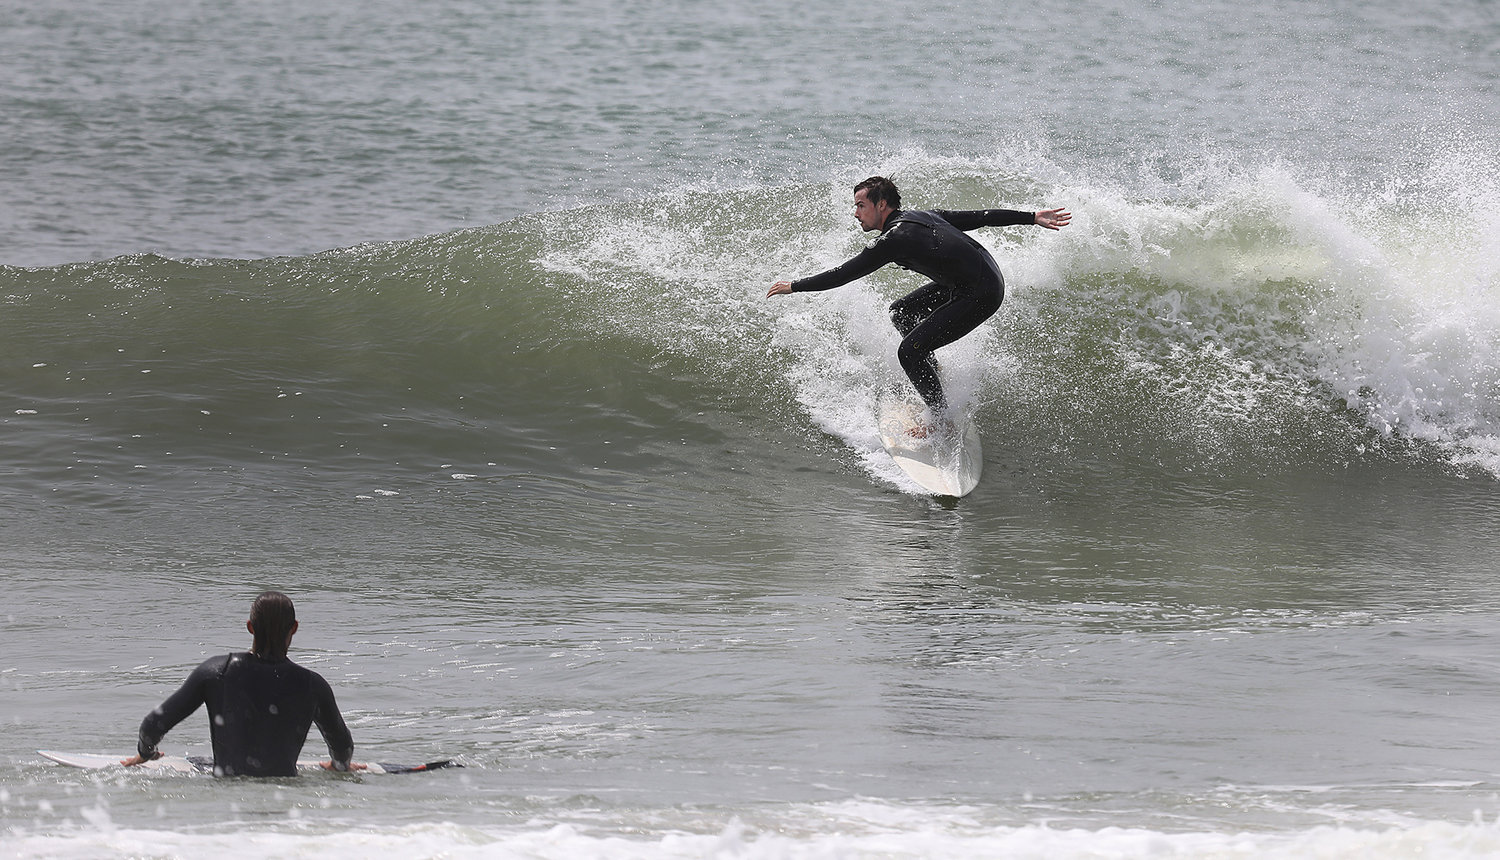 Wednesday was a popular day for surfers along the south shore as swells from an offshore storm provided good conditions.